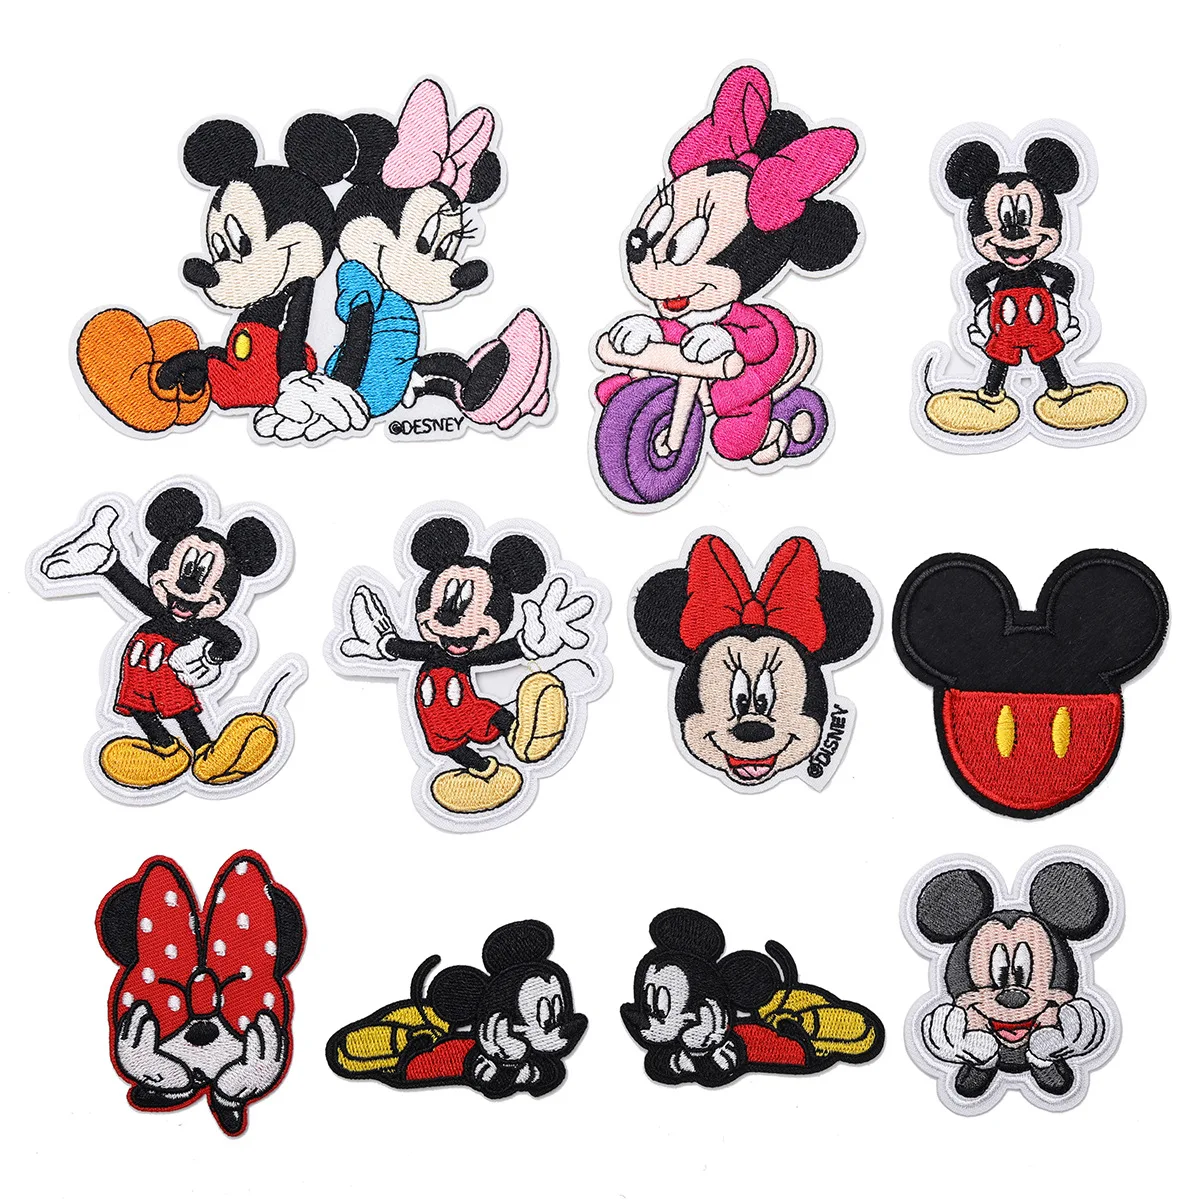 

11Pcs Mickey Mouse Minnie Patches DIY Sew Disney Fabric Iron on Patch Diy Decor Clothes T shirt Cartoon Embroidered Applique